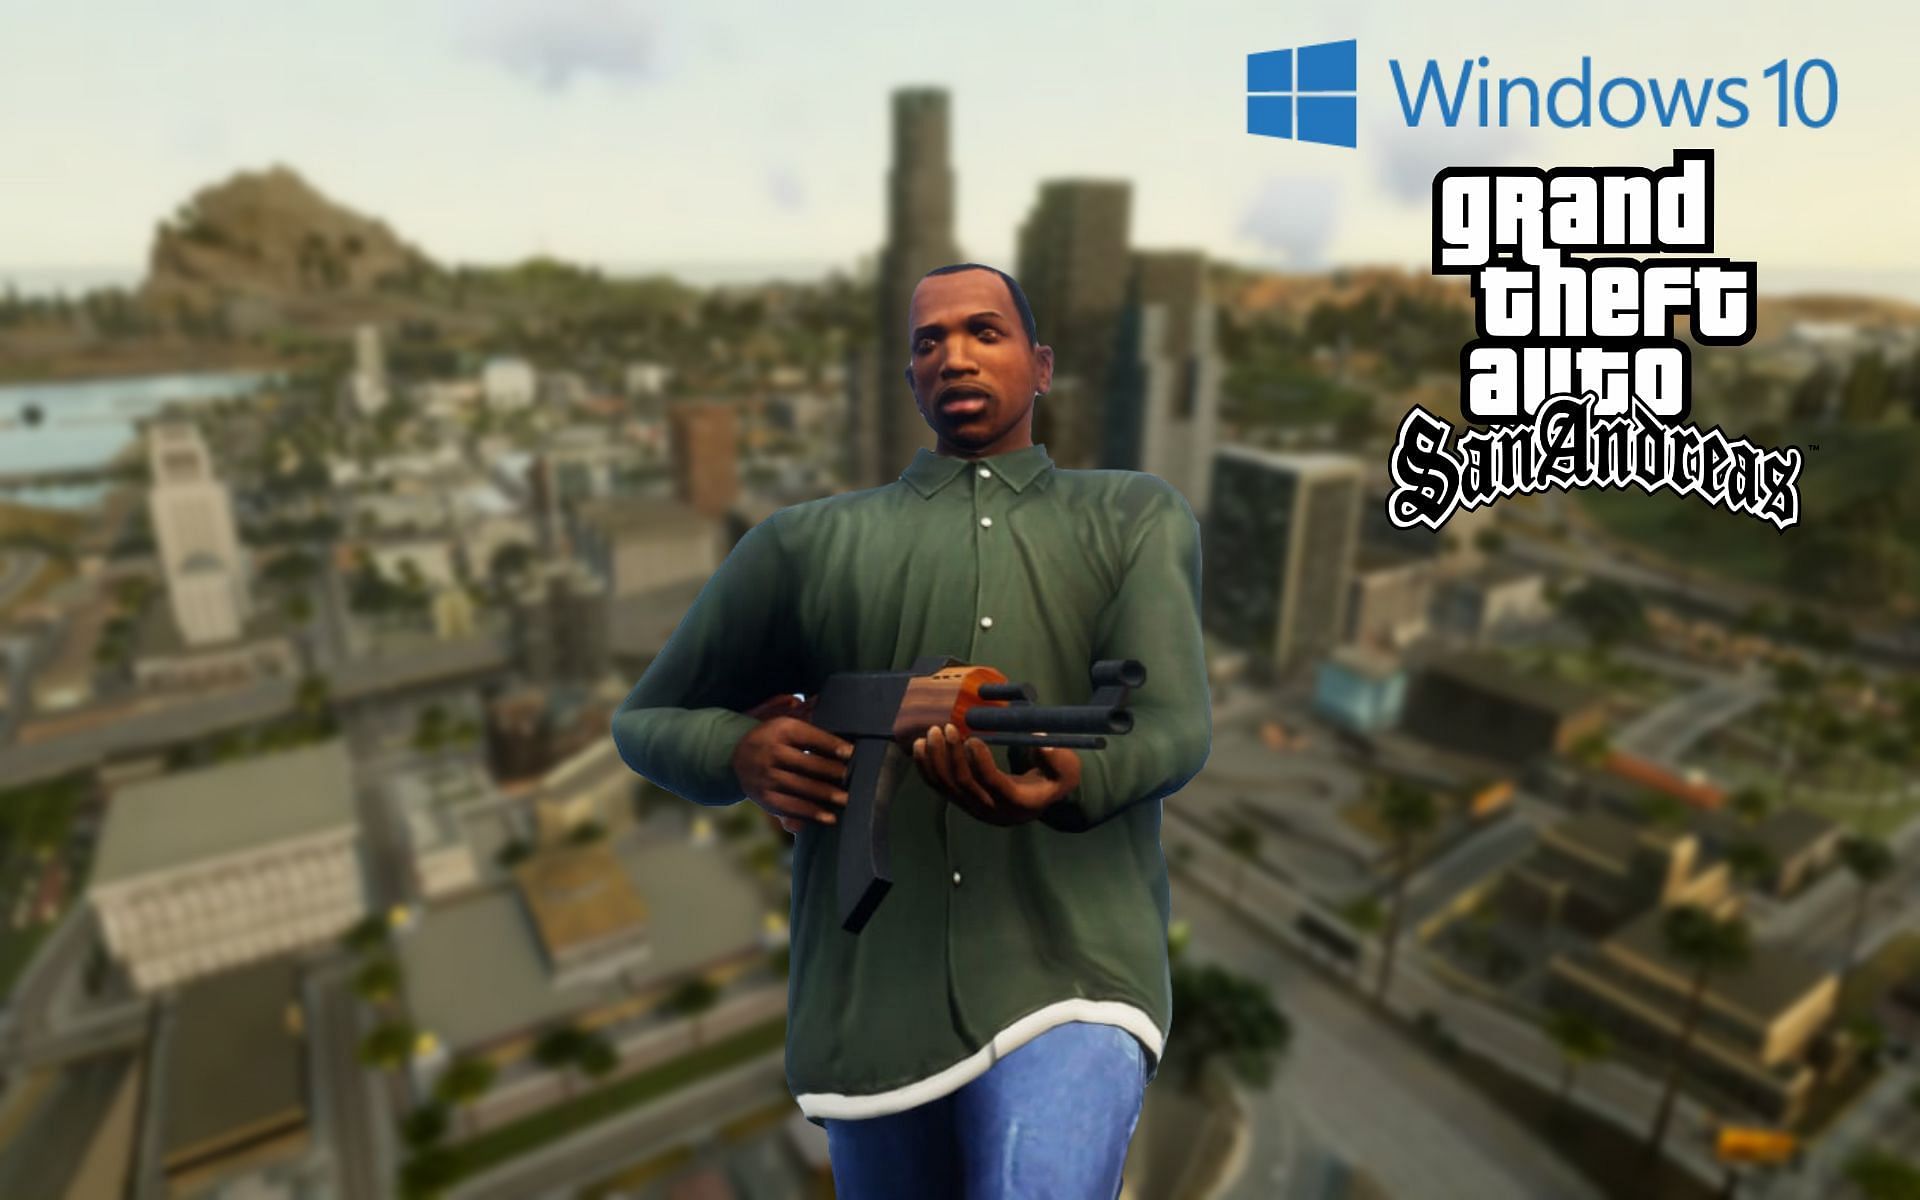 GTA San Andreas for Windows 10: Cheats, download, and more